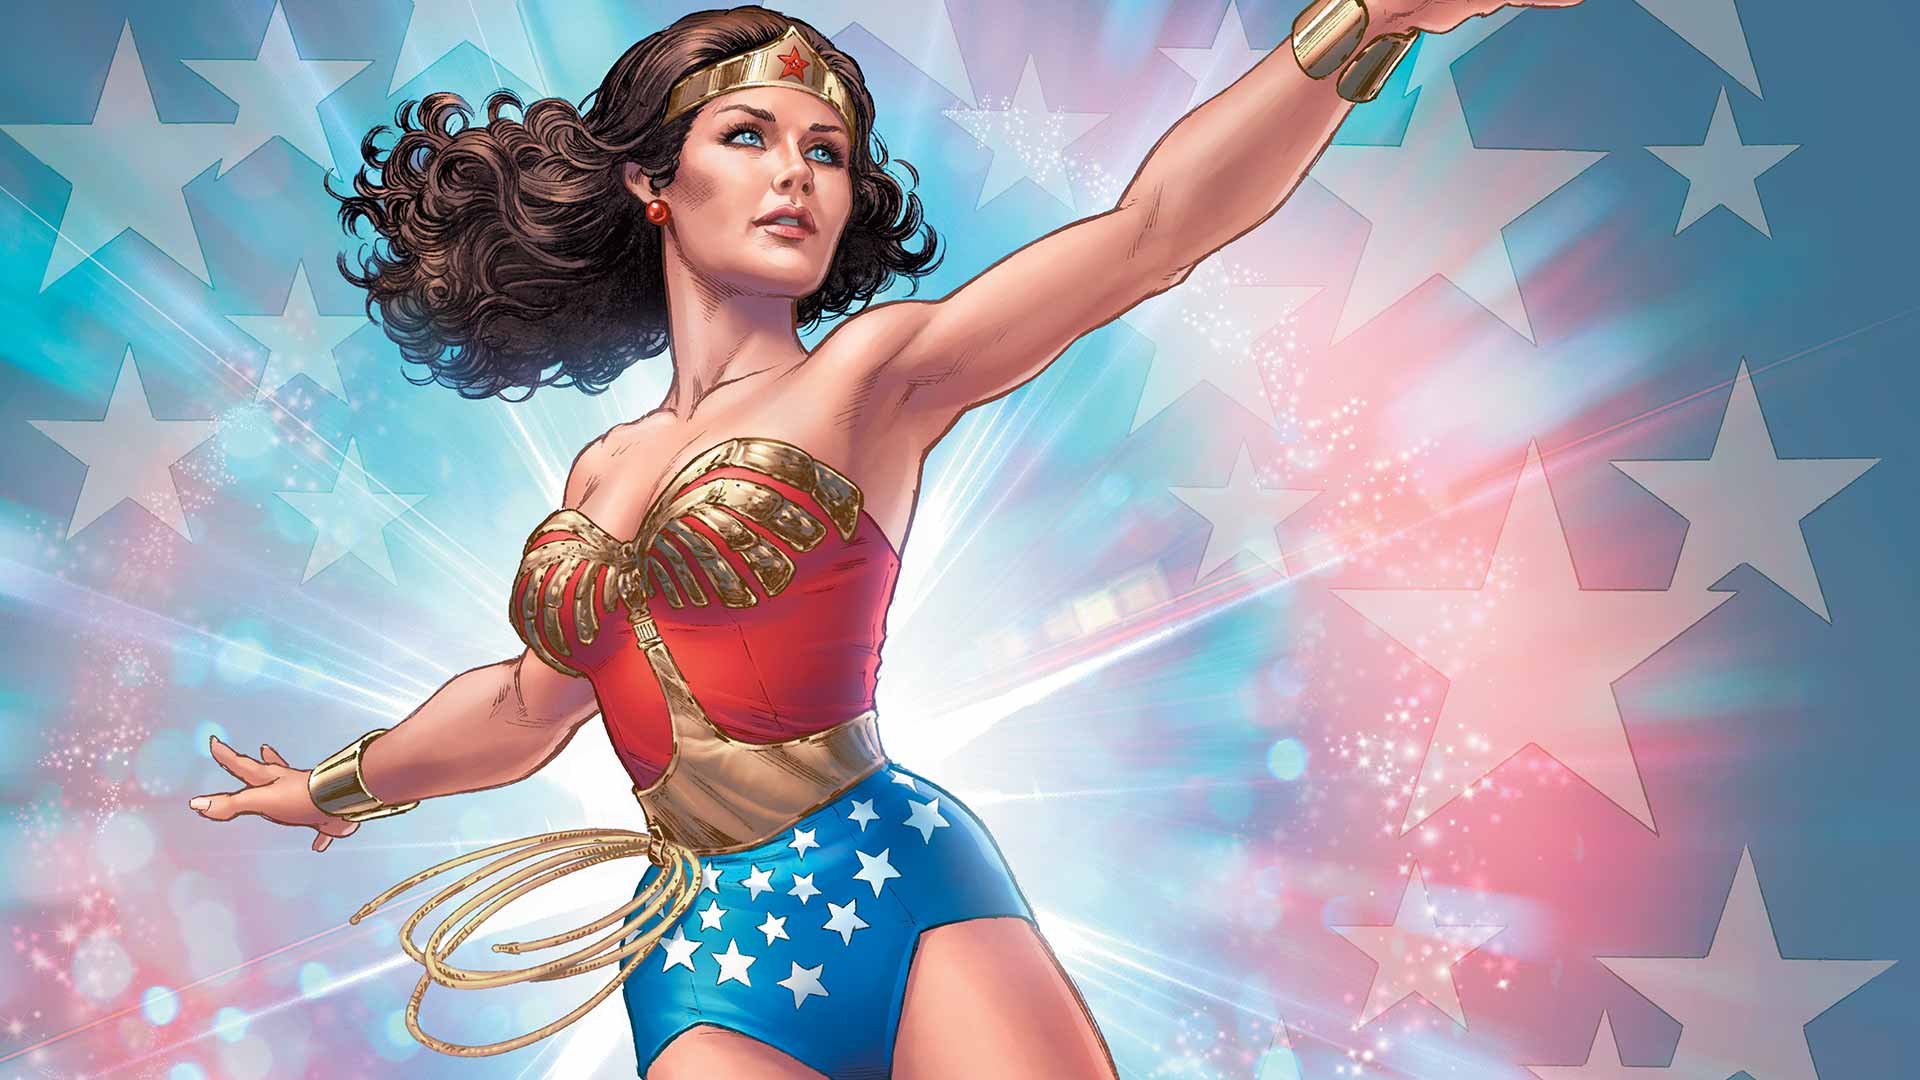 The Wonder Woman Mindset - Get Some! - The Three Tomatoes